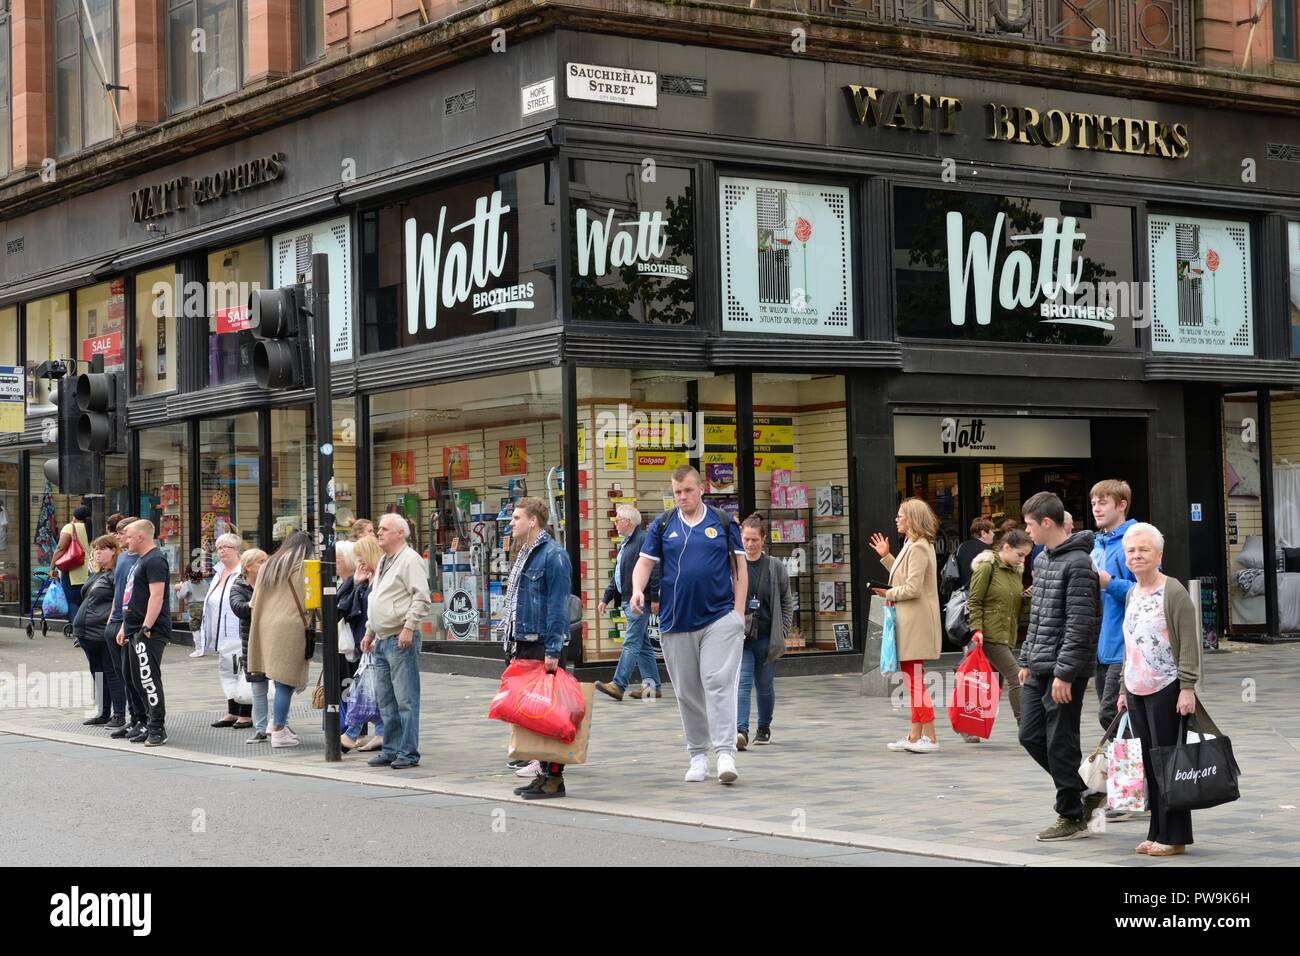 The Watt Brothers store frontage in Glasgow, Scotland, UK Stock Photo